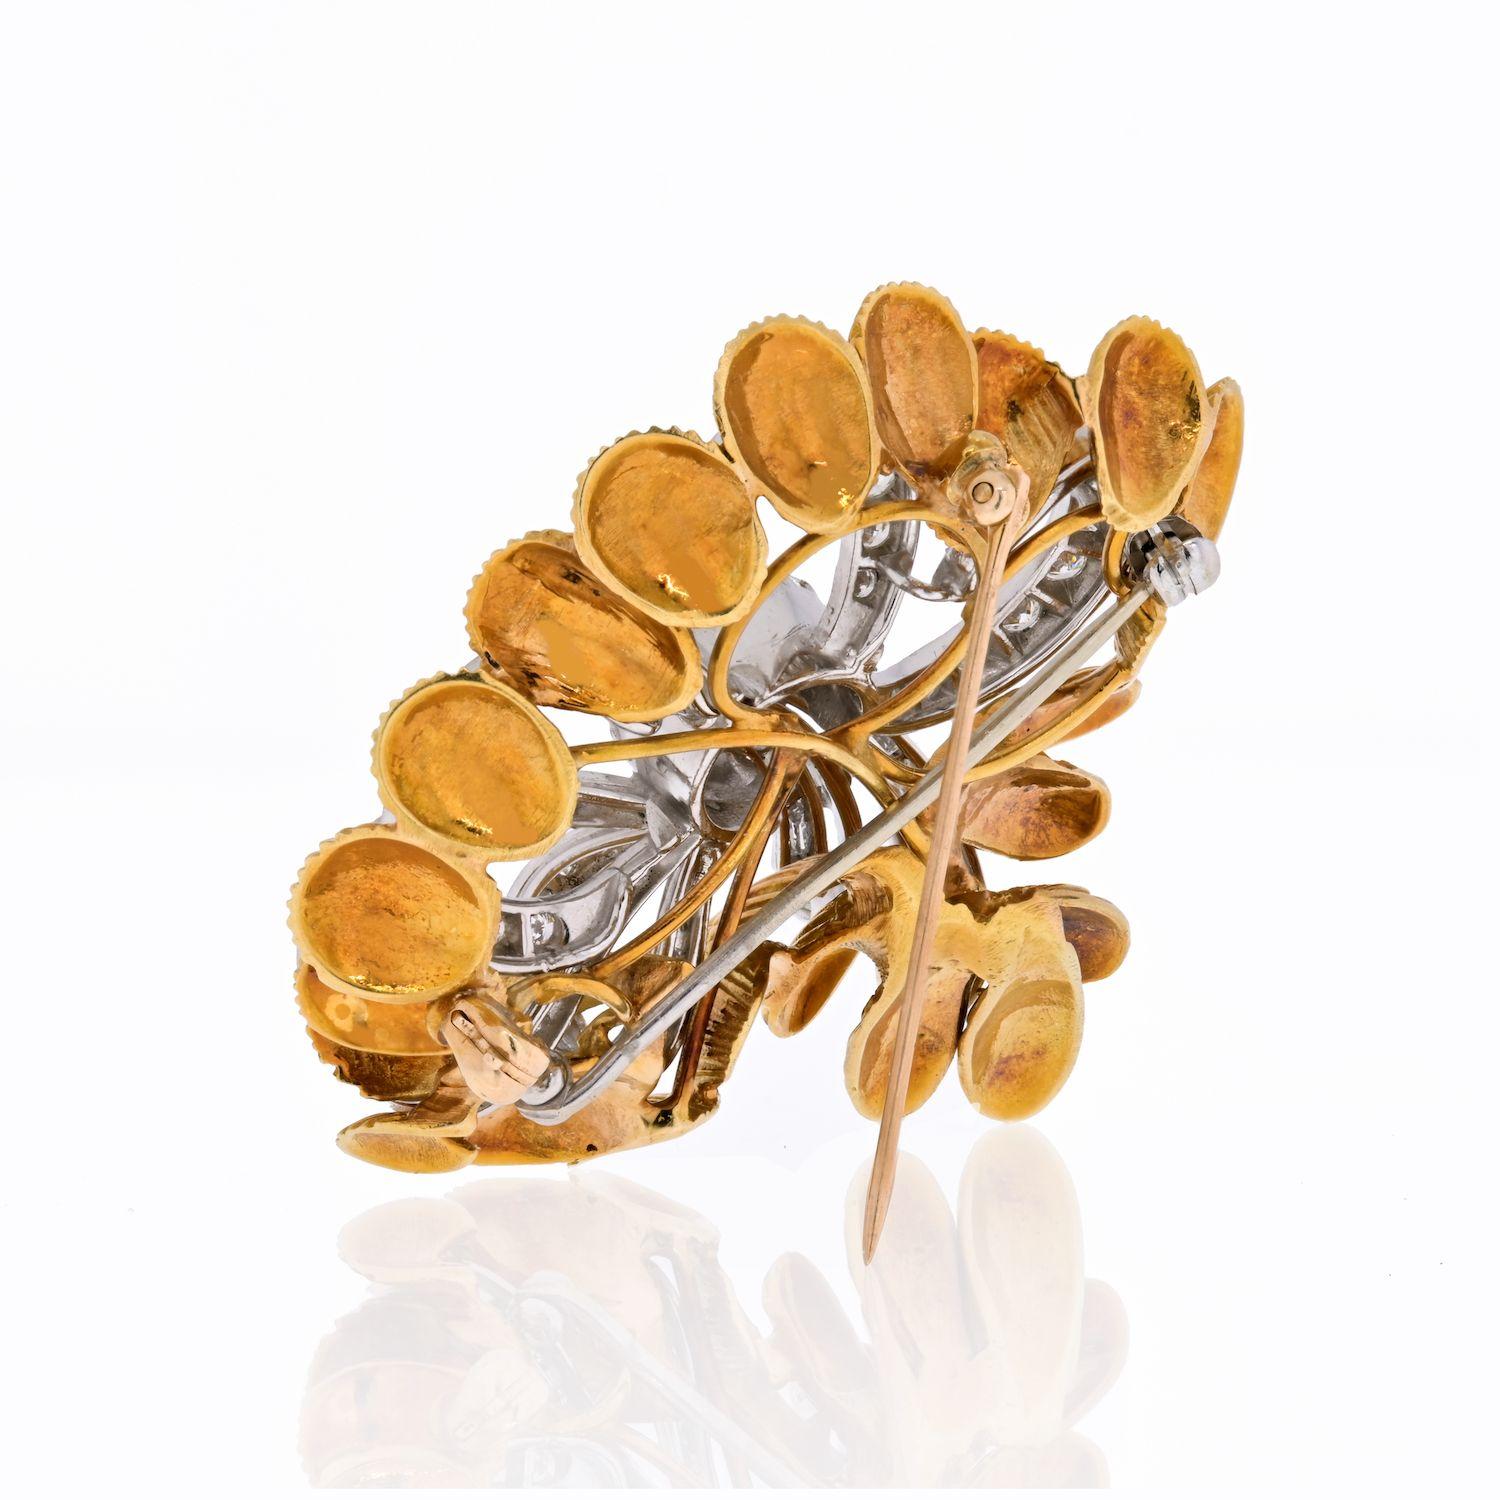 Platinum and 18 Karat Yellow Gold 4 Carat Diamond Bow Brooch, circa 1950s In Excellent Condition For Sale In New York, NY